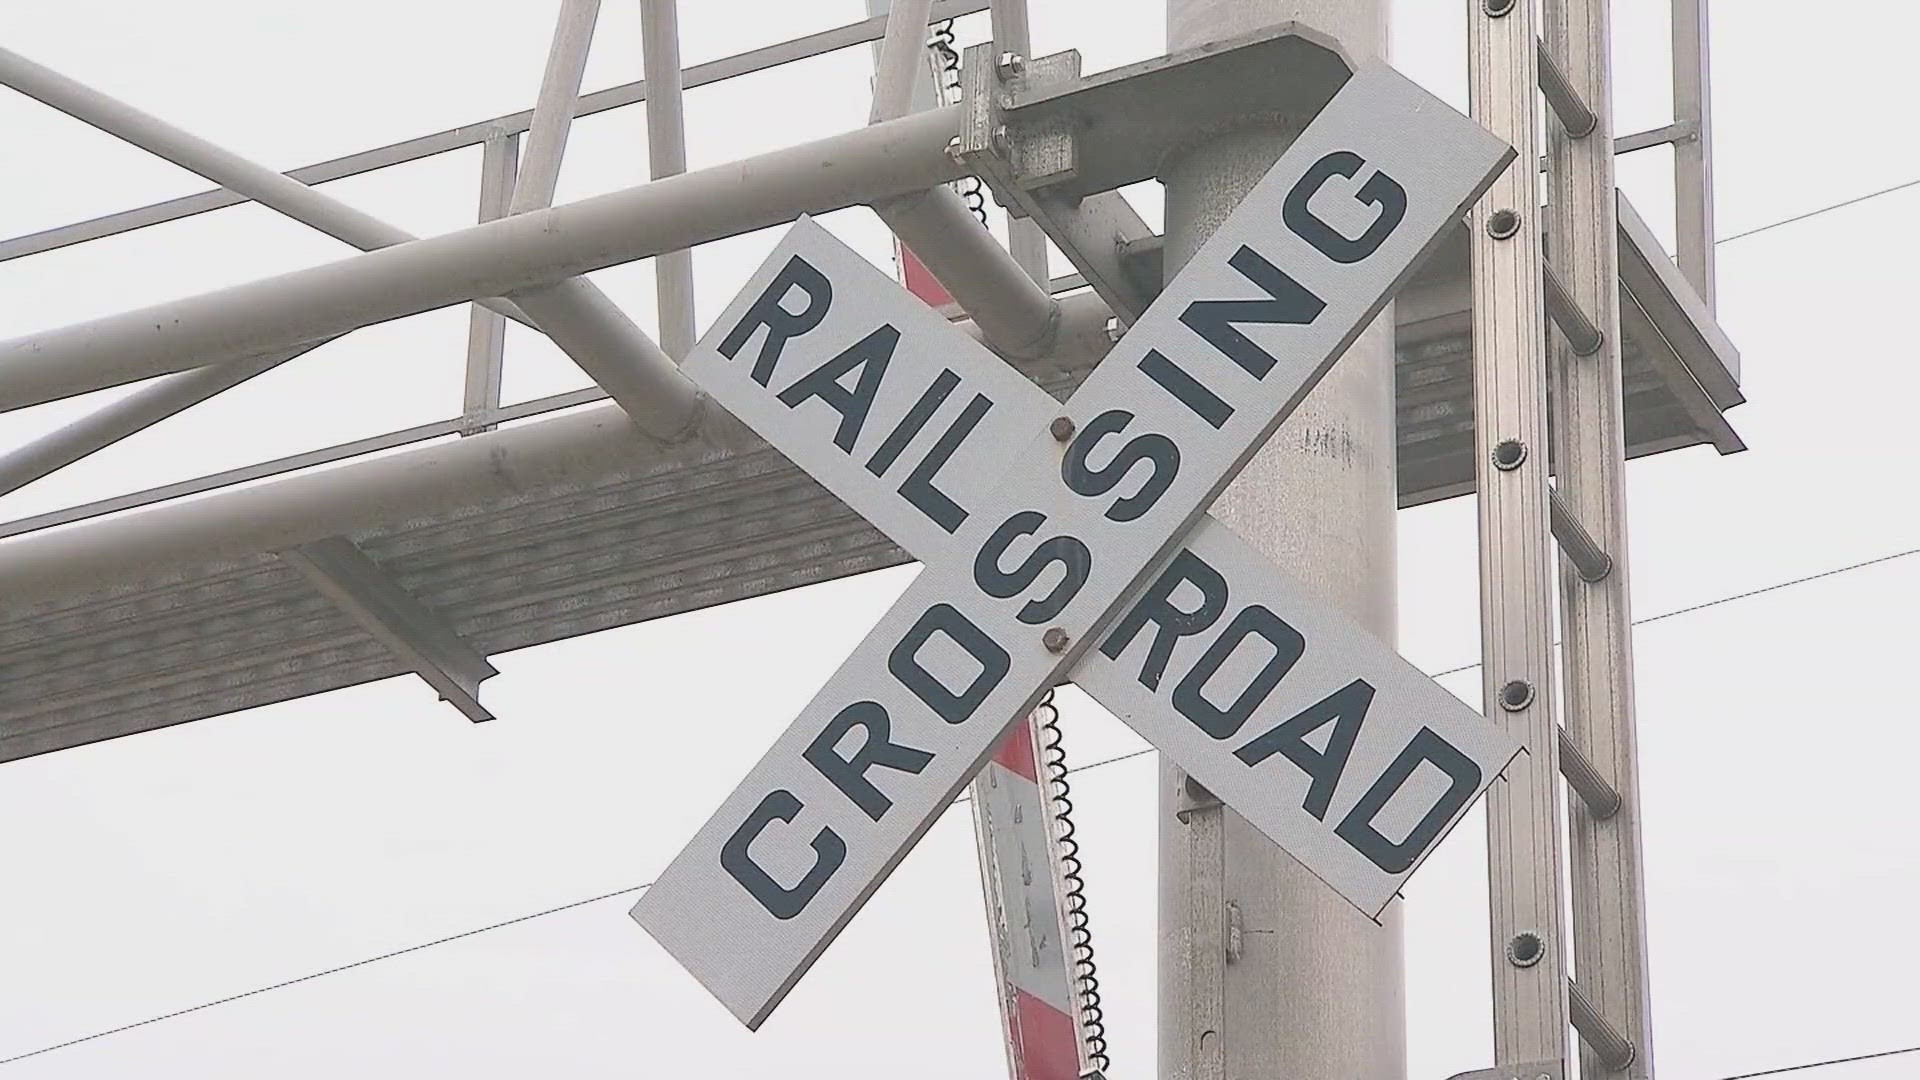 The new rule arrives more than a year after a Norfolk Southern train derailed in East Palestine, Ohio, spilling hazardous chemicals.